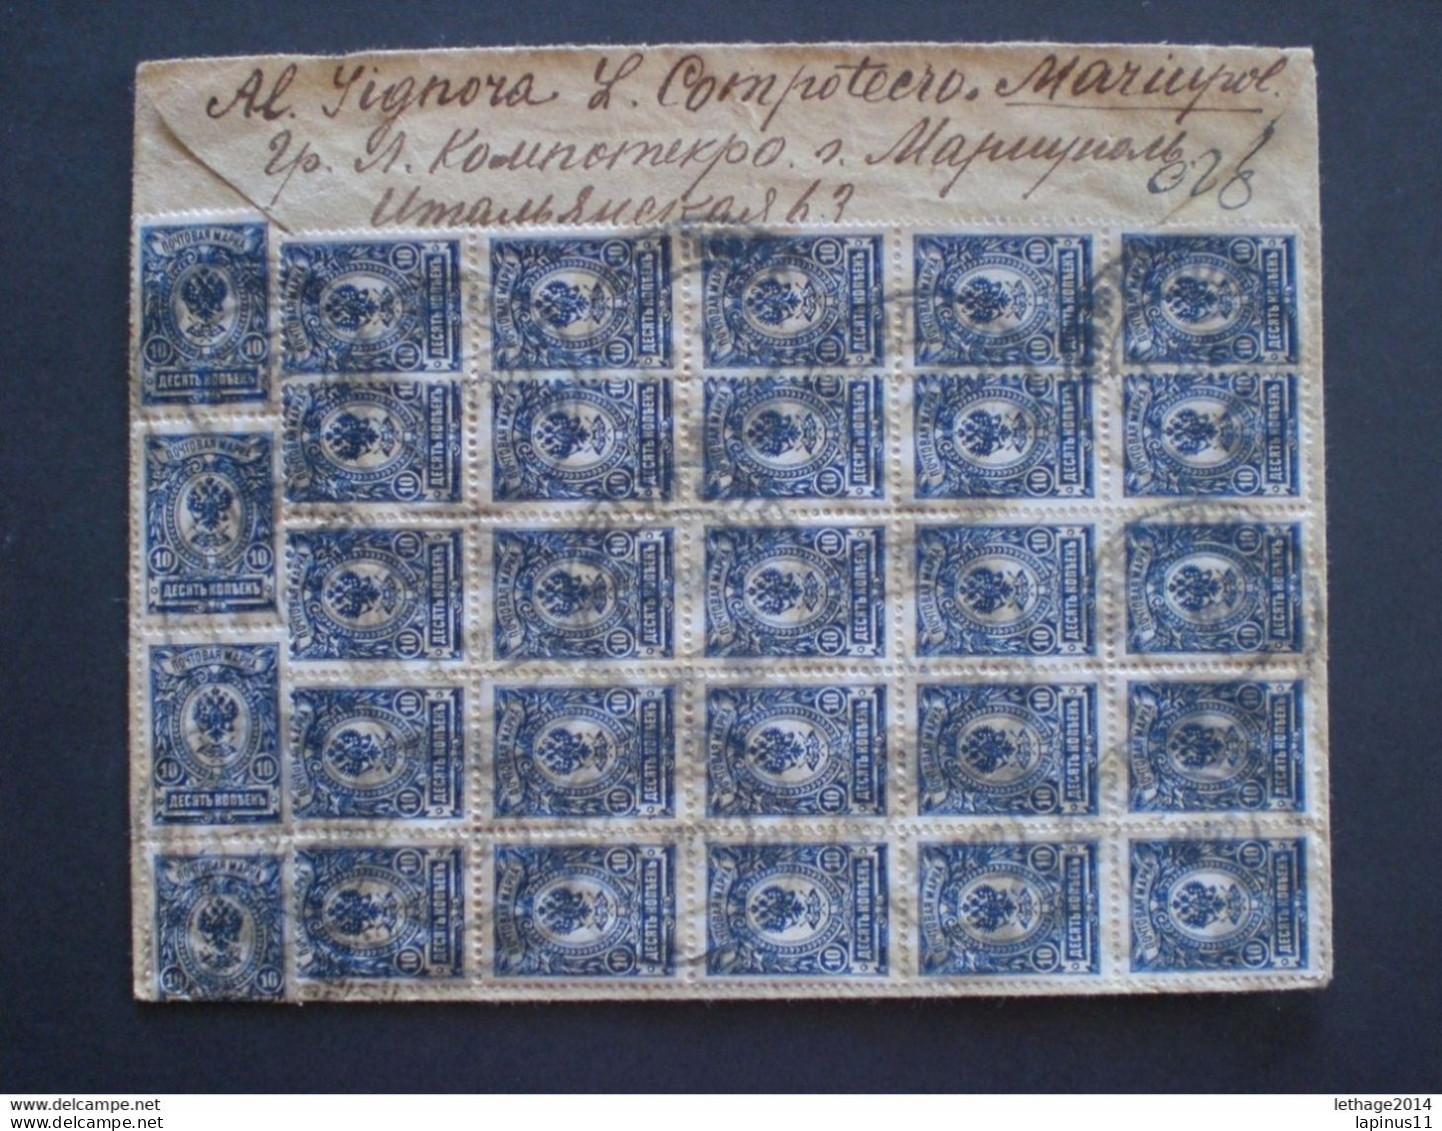 RUSSIA RUSSIE РОССИЯ STAMPS COVER 1923 Registered Mail RUSSIE TO ITALY MANY STAMPS FULL 30 STAMPS !! RRRRR RIF.TAGG.(2) - Lettres & Documents